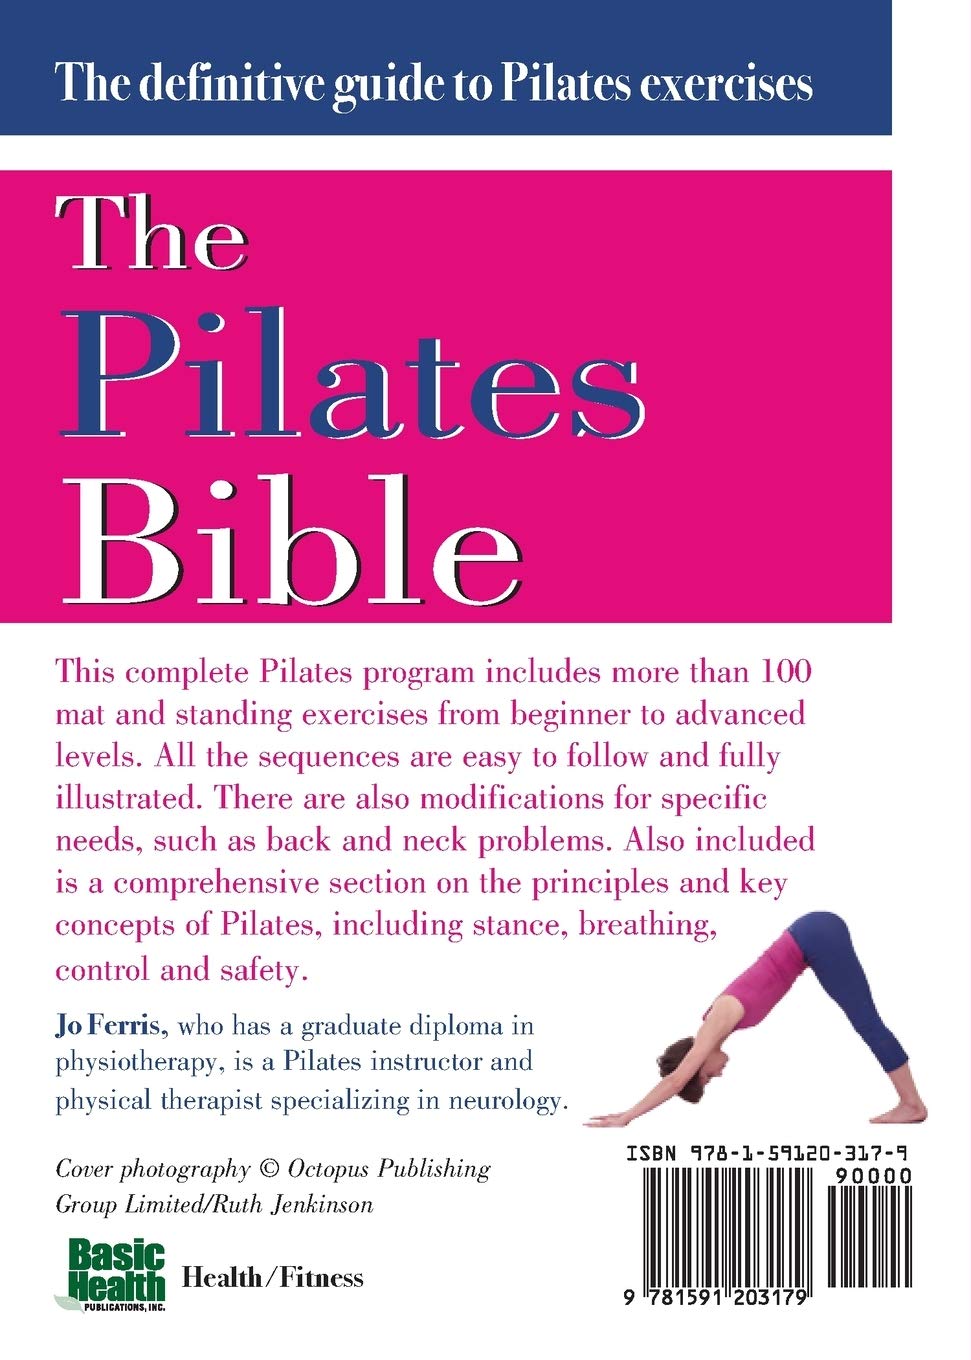 The Pilates Bible: The Definitive Guide to Pilates Exercises: The  Definitive Guide to Pilates Excercise